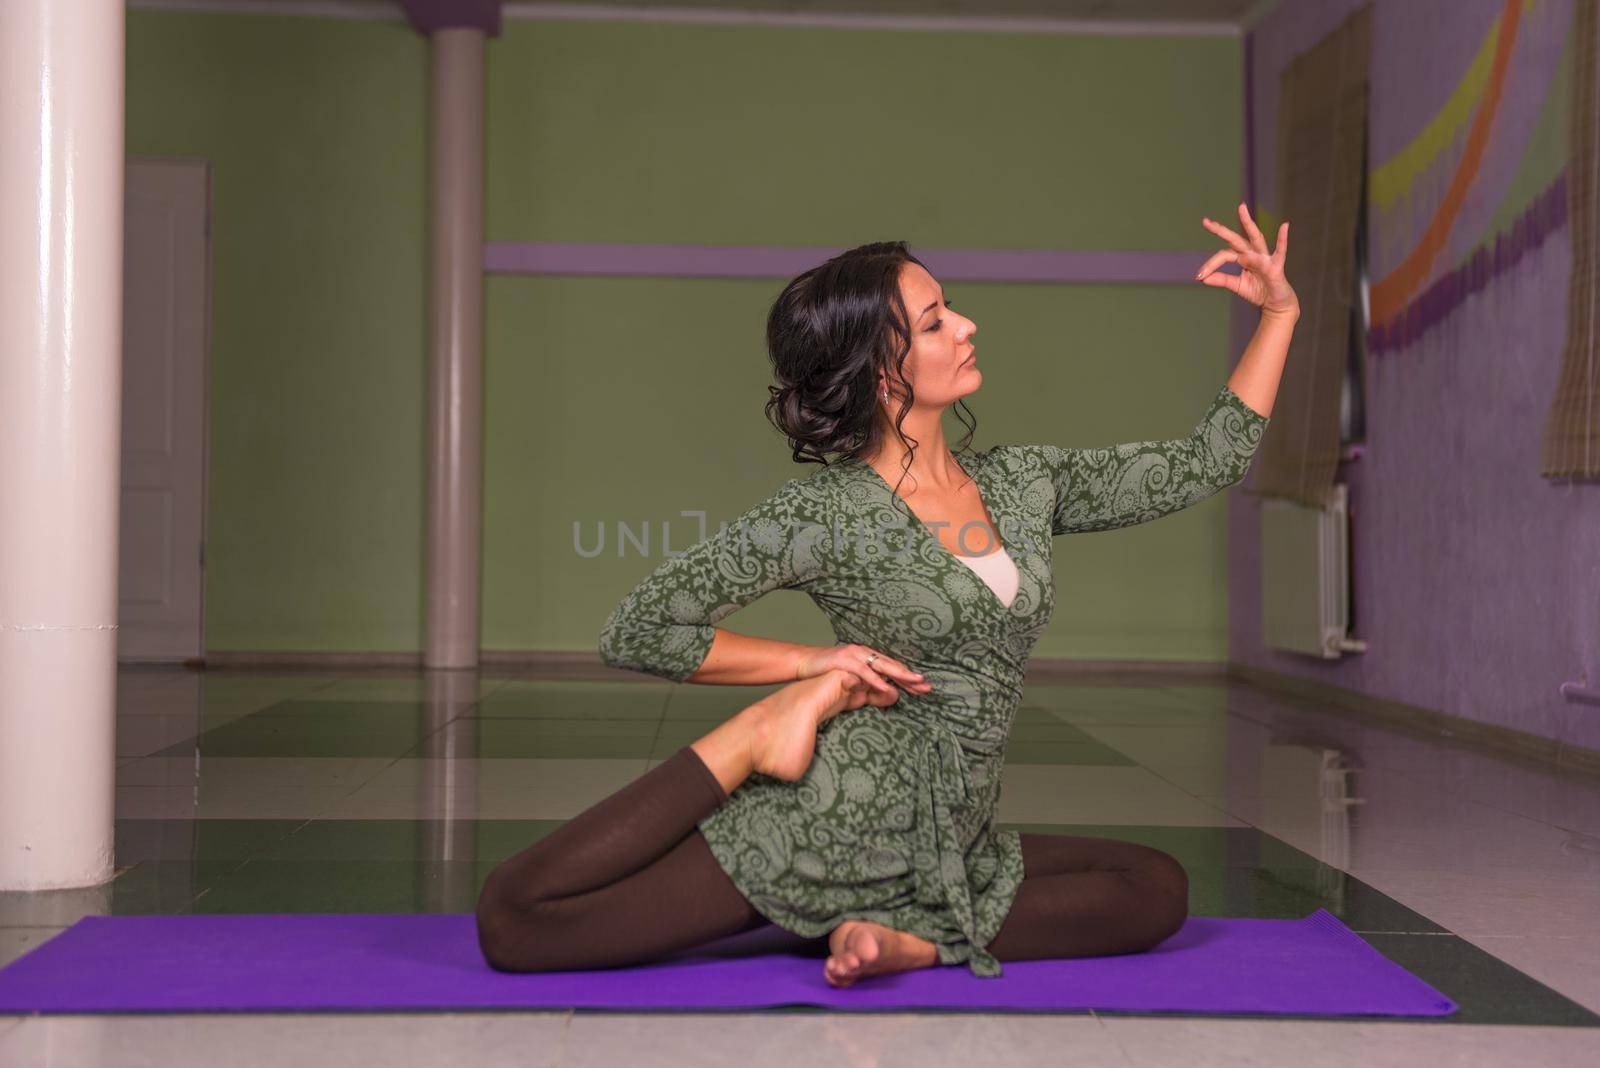 Fit girl performs yoga asana in a studio by Proff